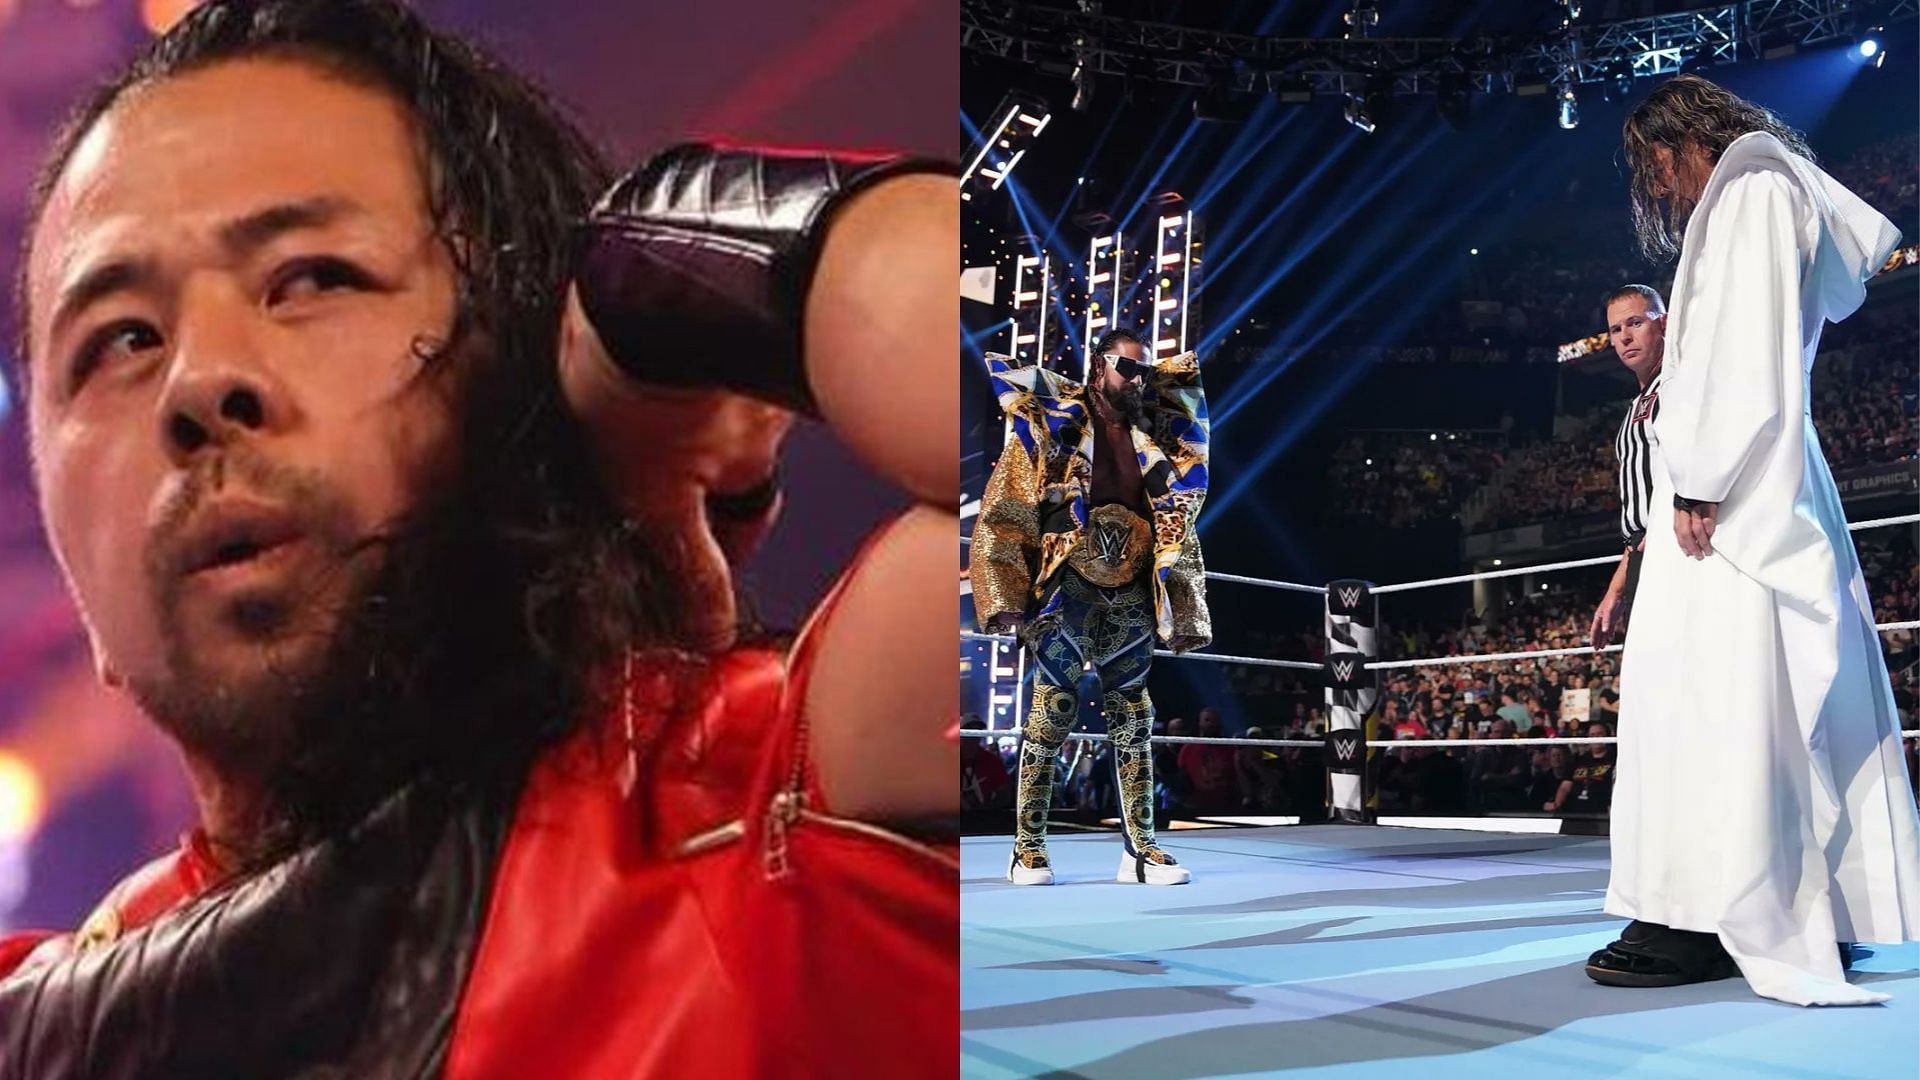 Shinsuke Nakamura was once again unsuccessful in beating Seth Rollins